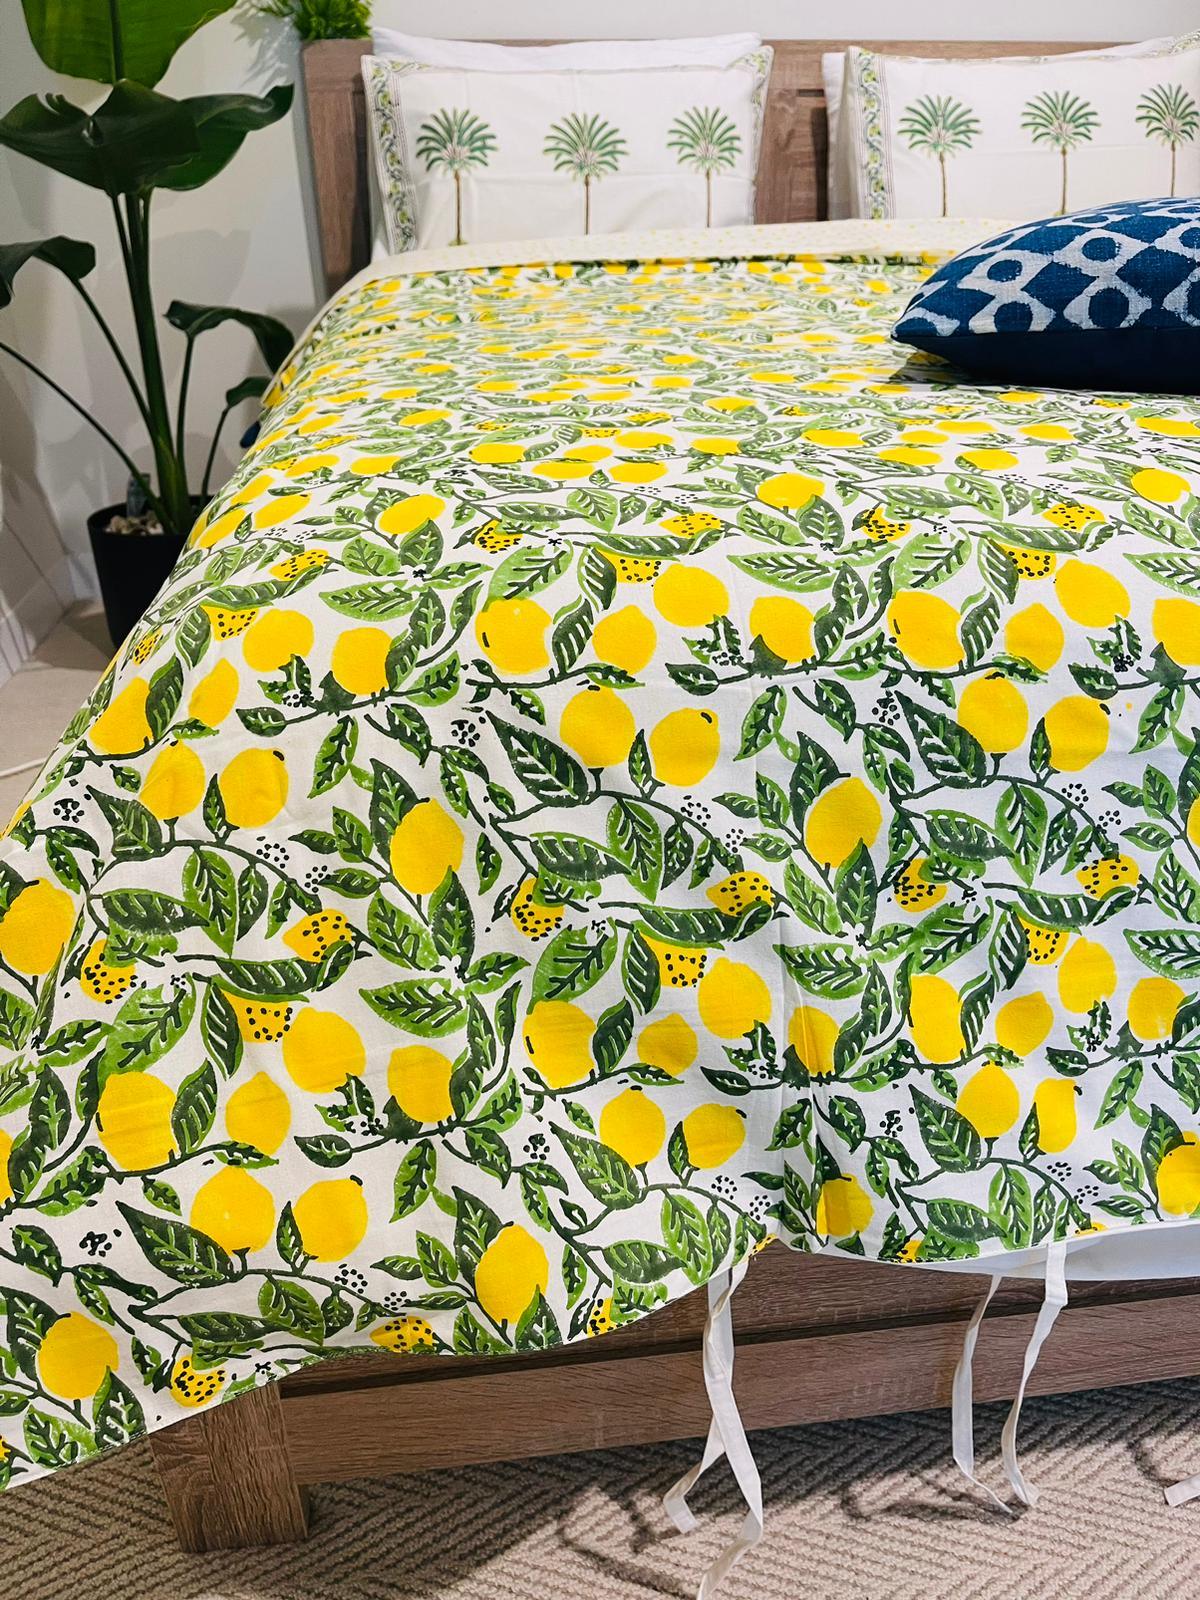 Lemon Cotton Quilt cover Hand block print - Rooii by Tuvisha